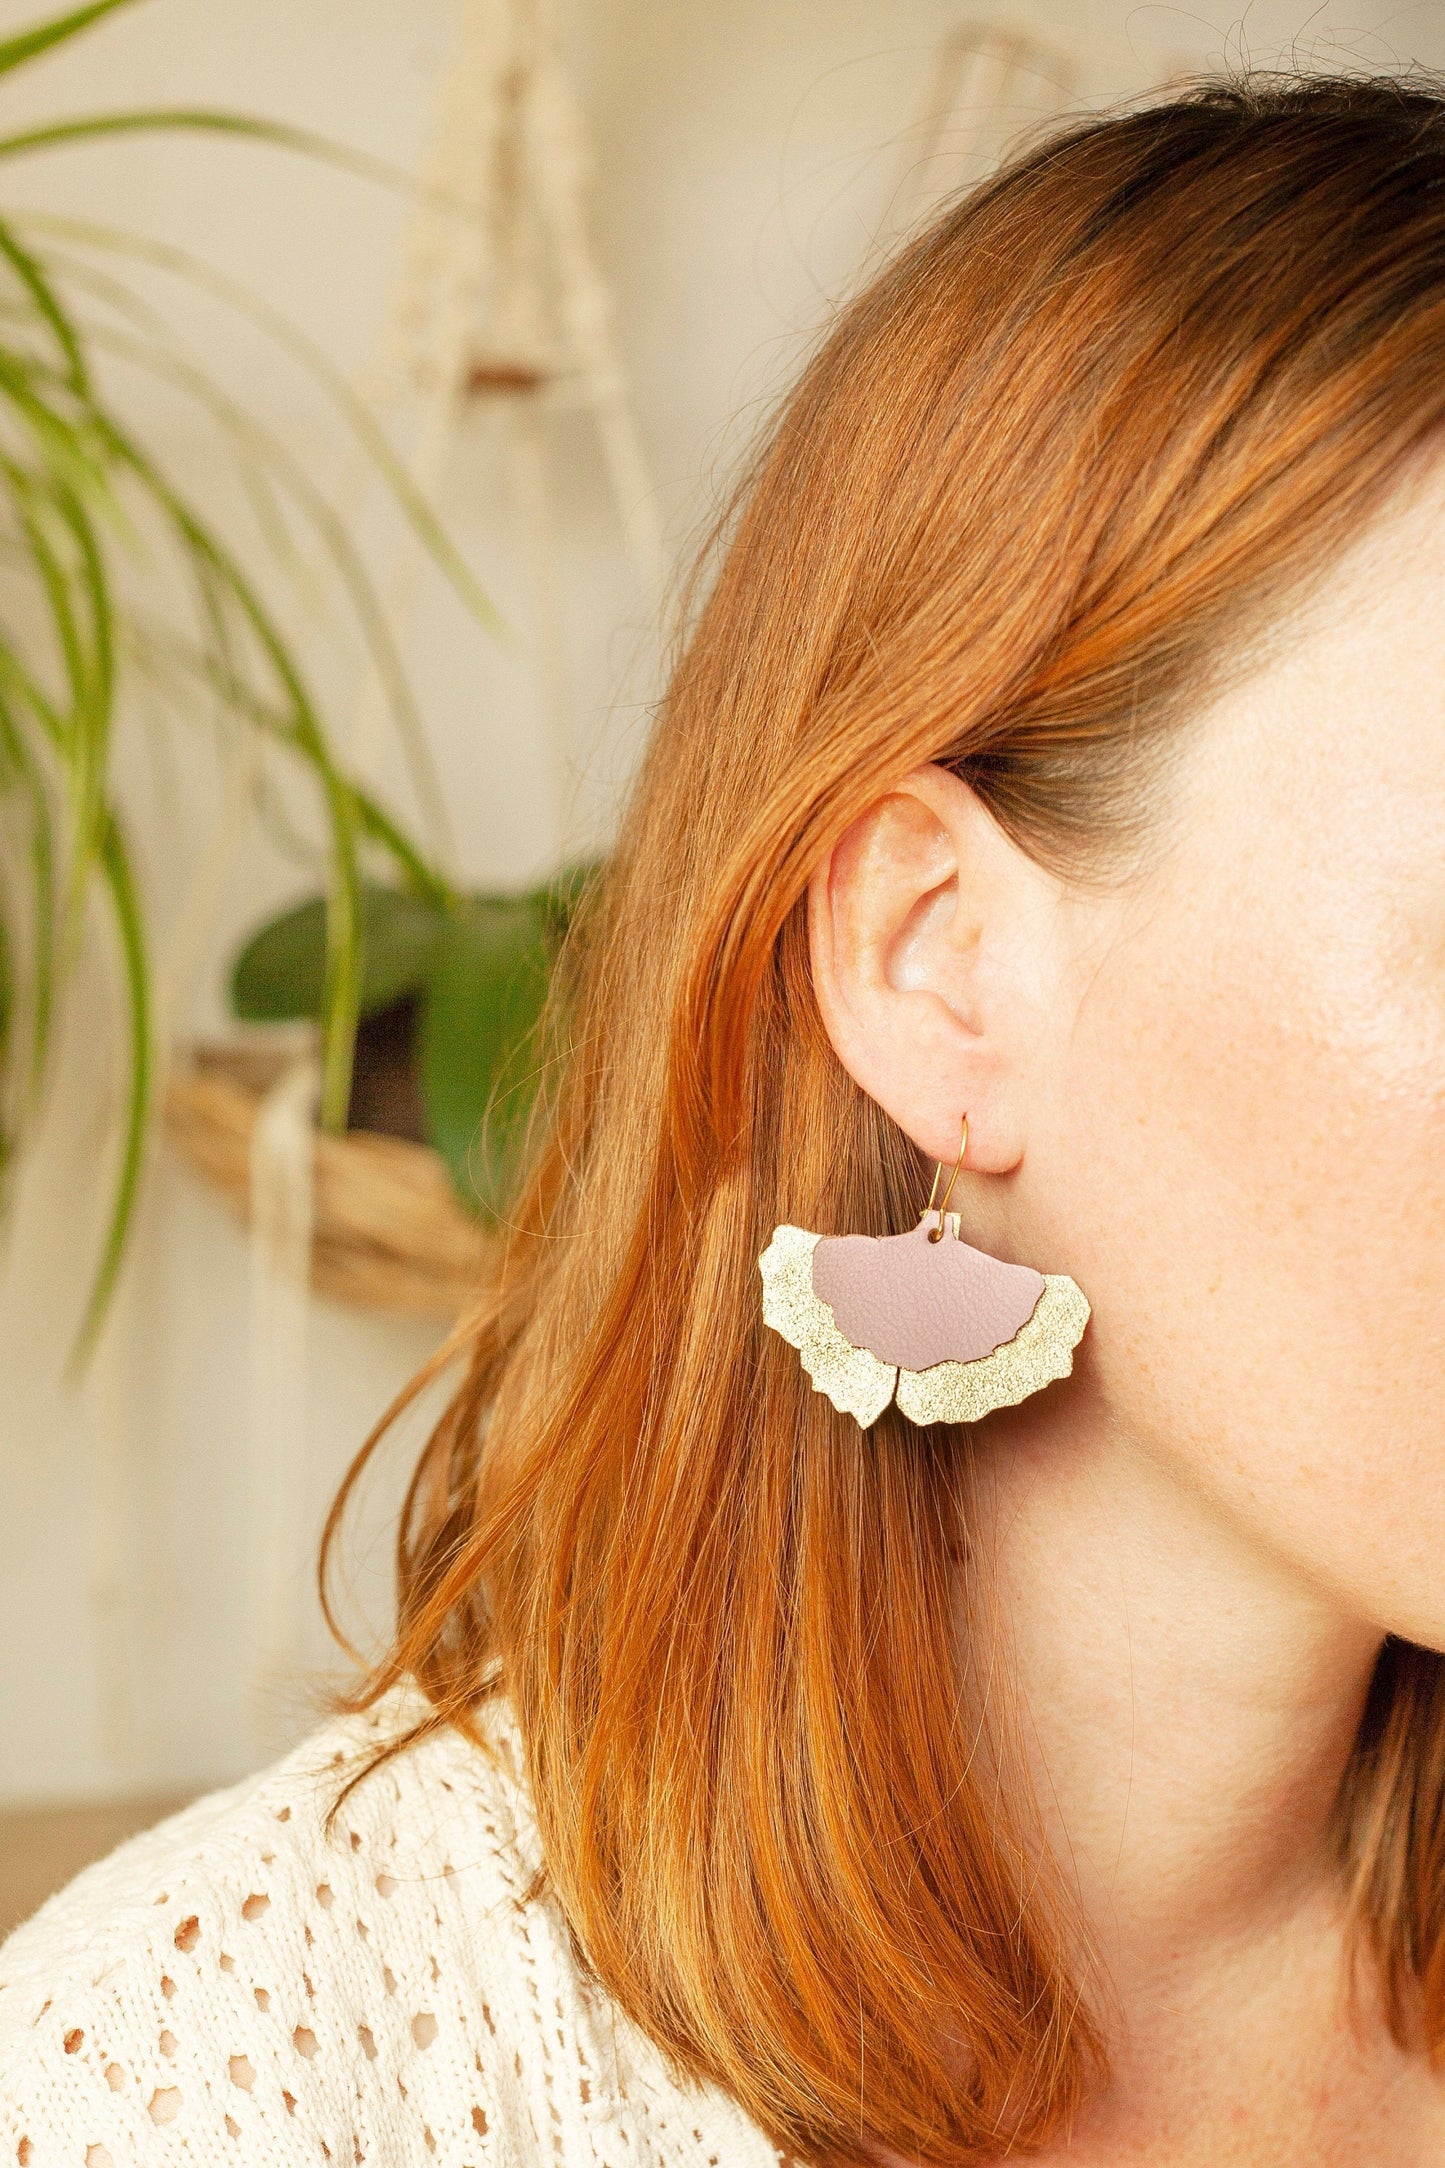 Ginkgo leaf earrings in gold and pink leather